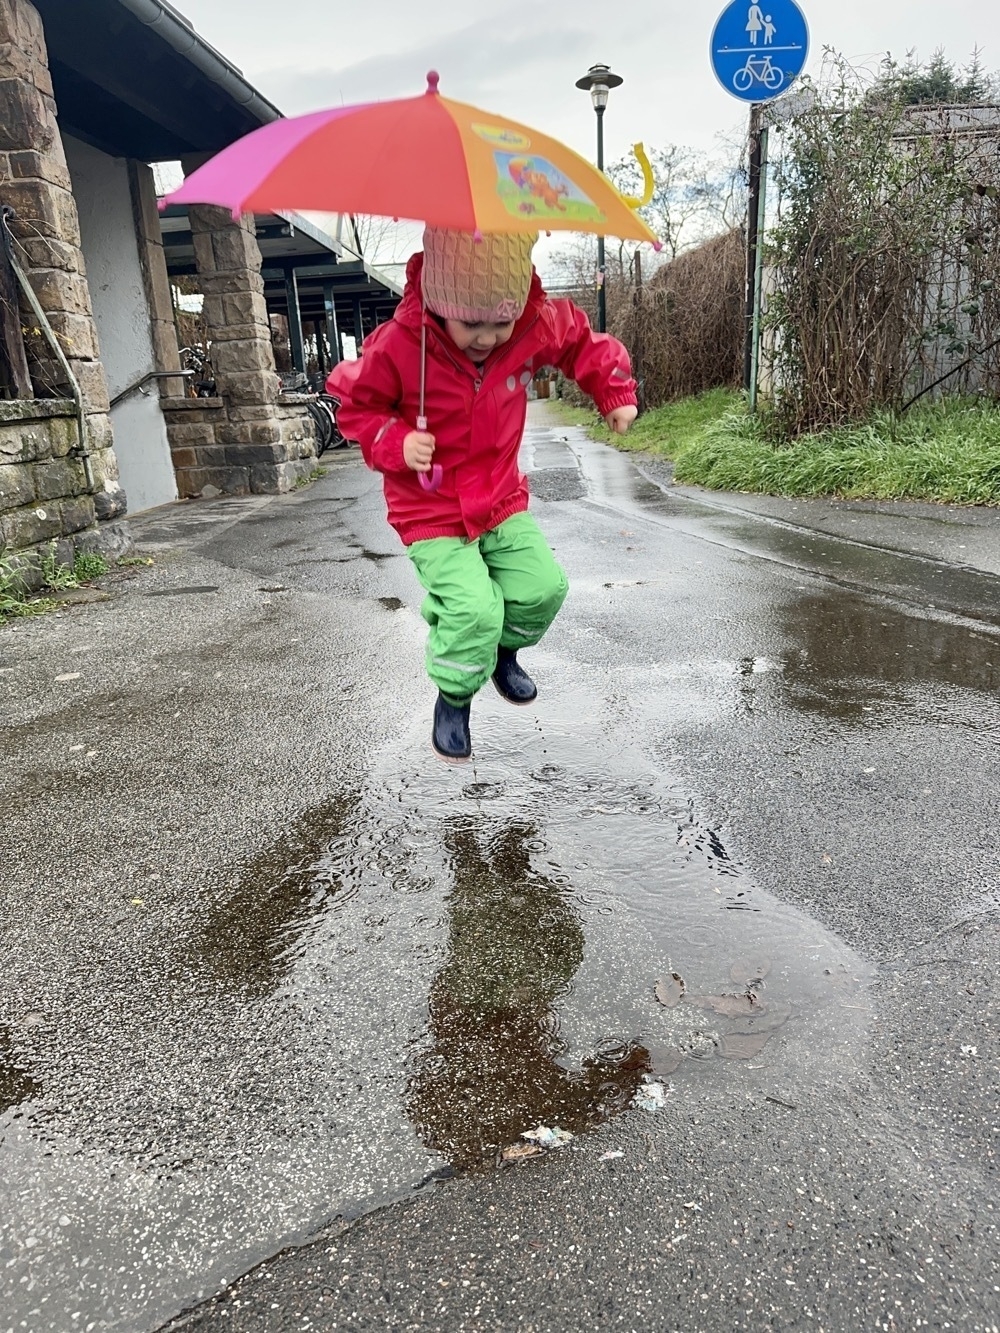 Little girl, holding an umbrella, and jumping in the air over a puddle on the sidewalk.